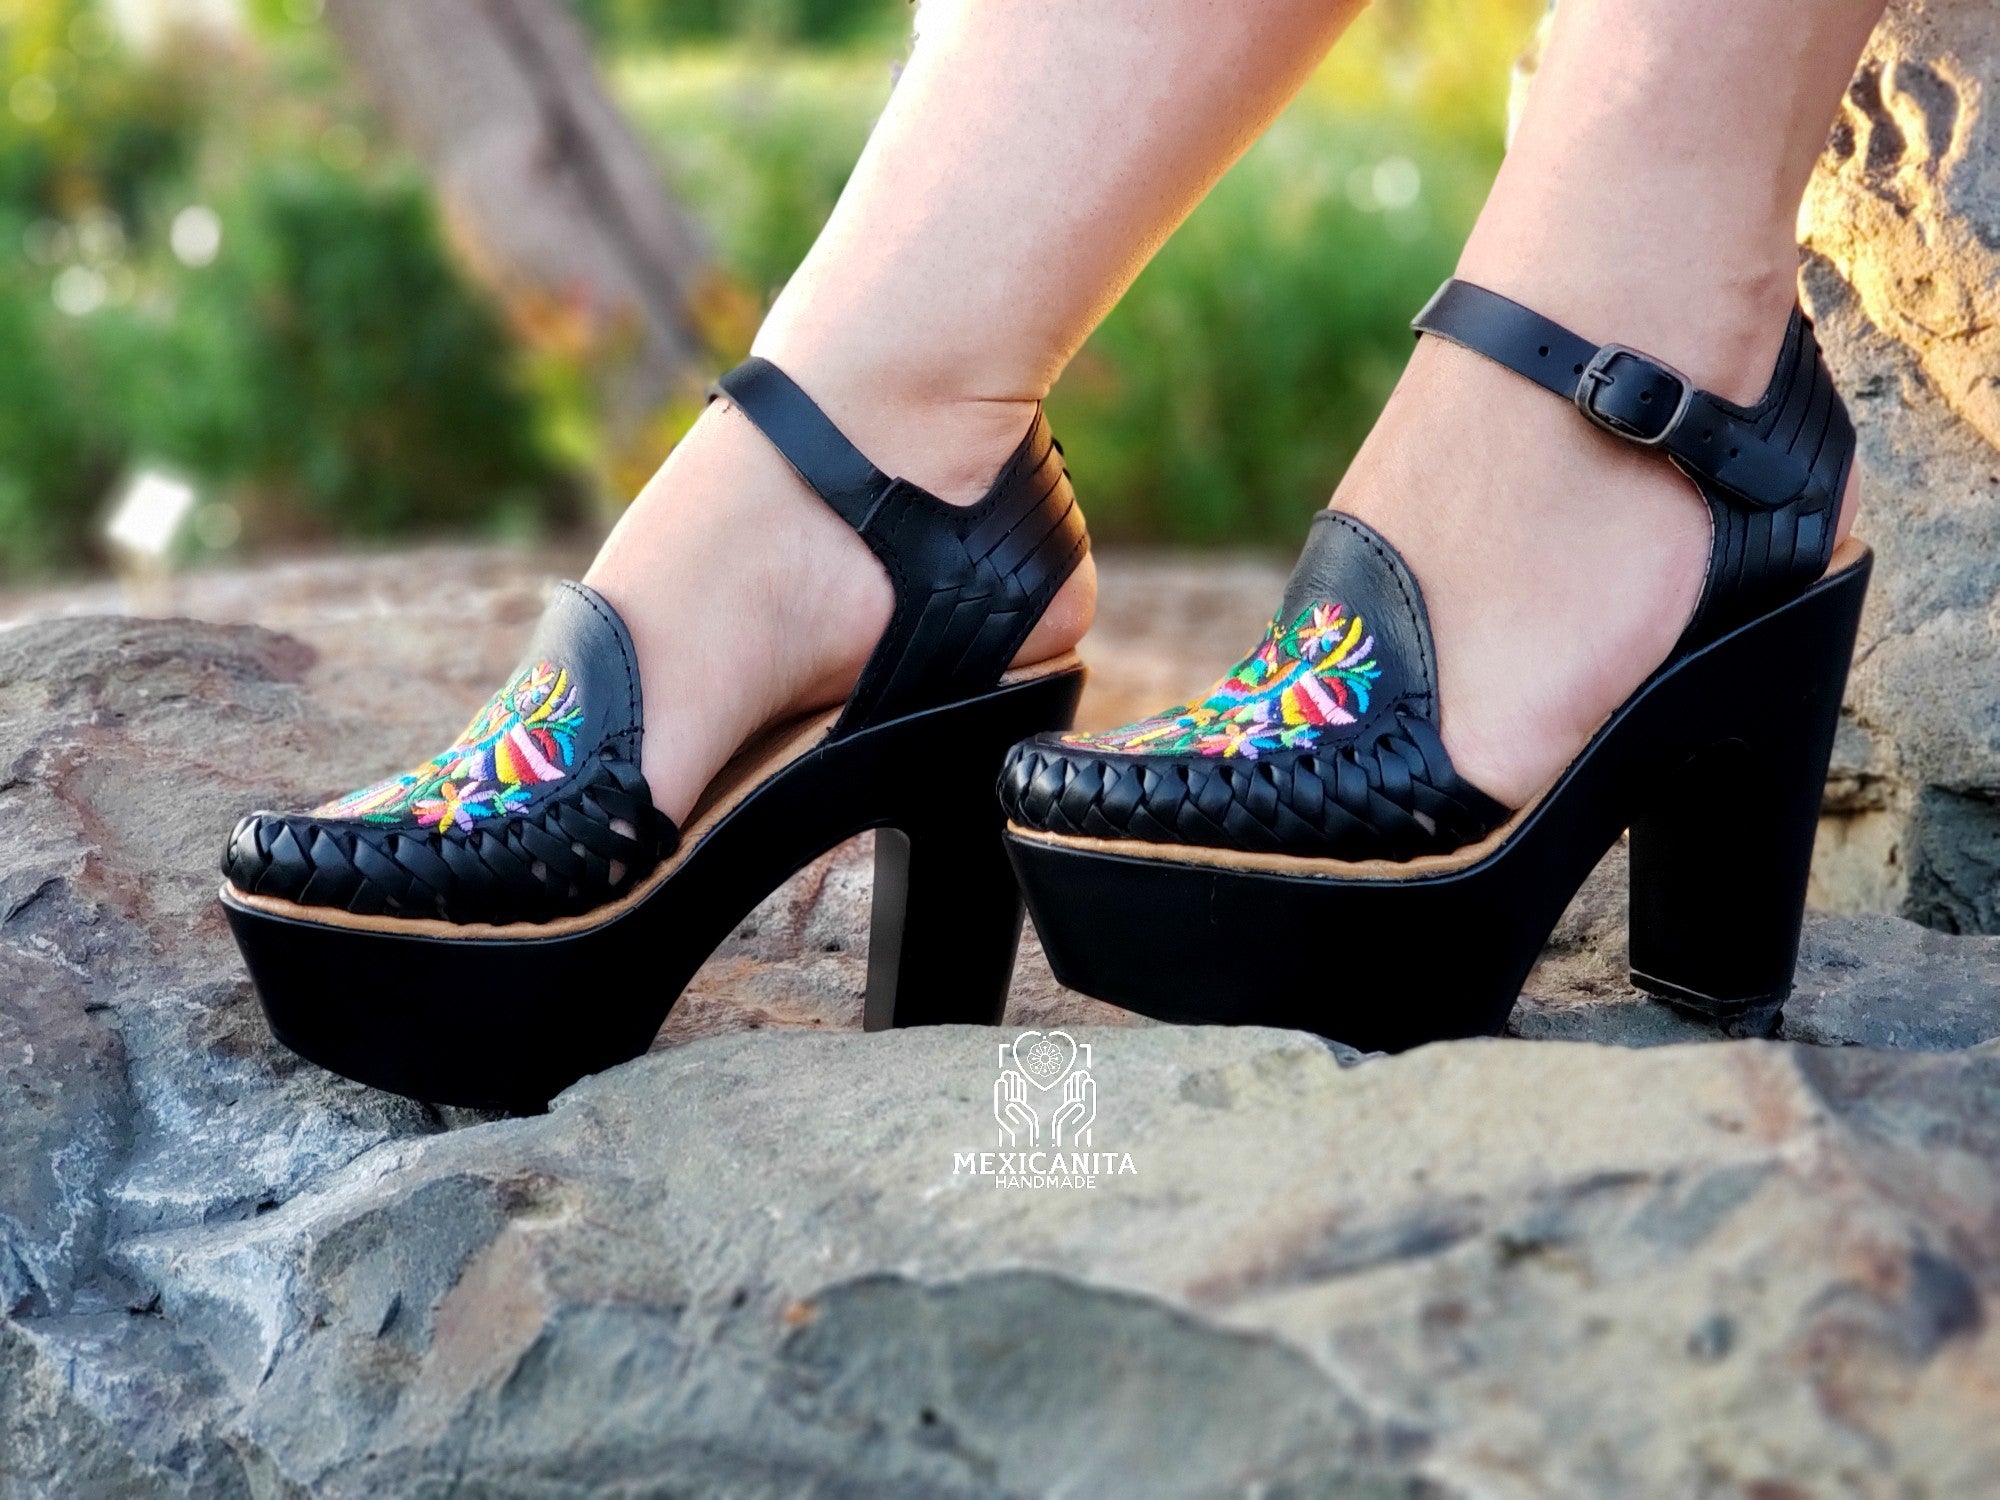 camille gobin add photo mexican high heel shoes